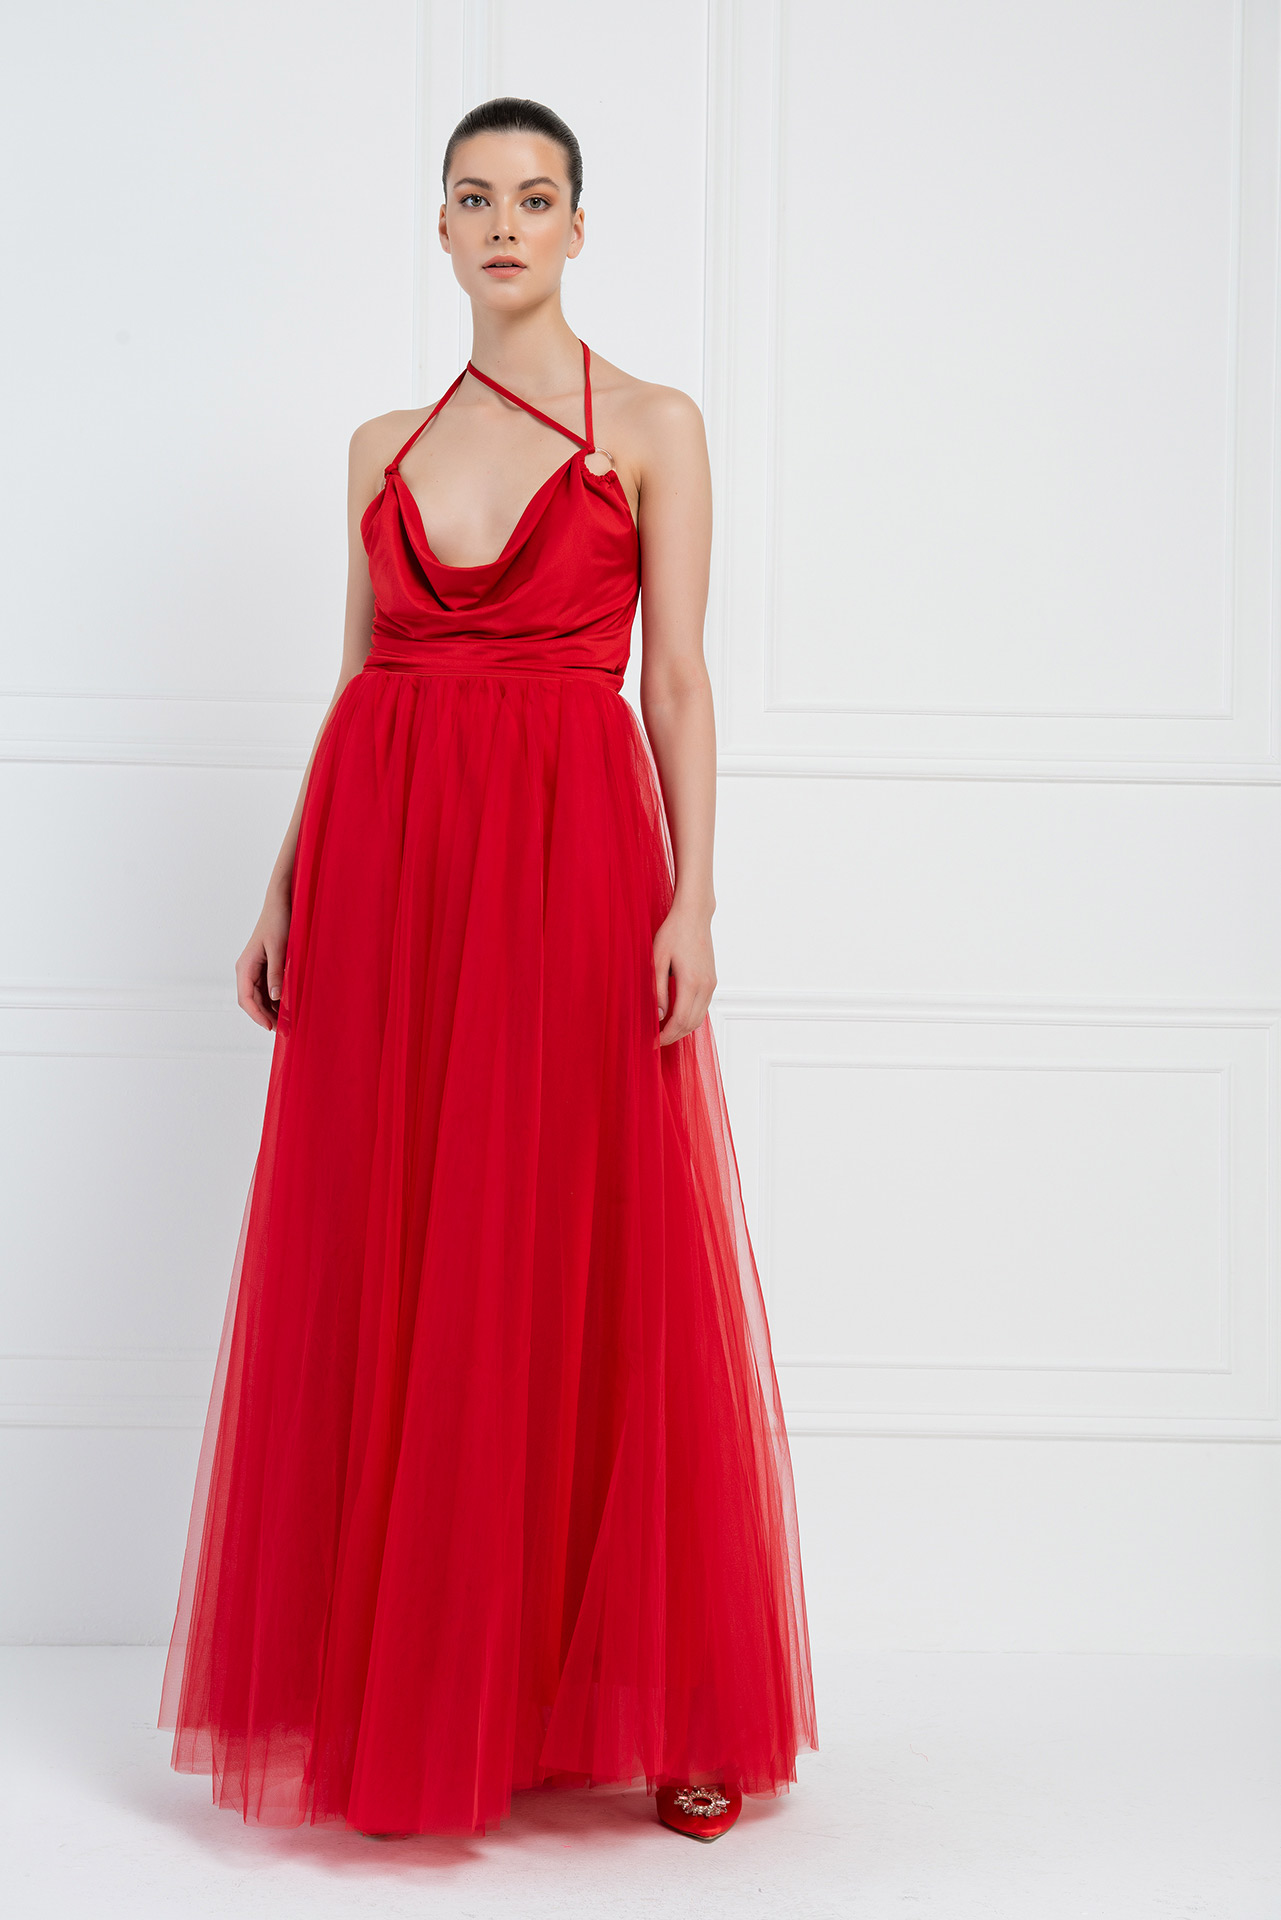 Wholesale Red Maxi Tulle Skirt